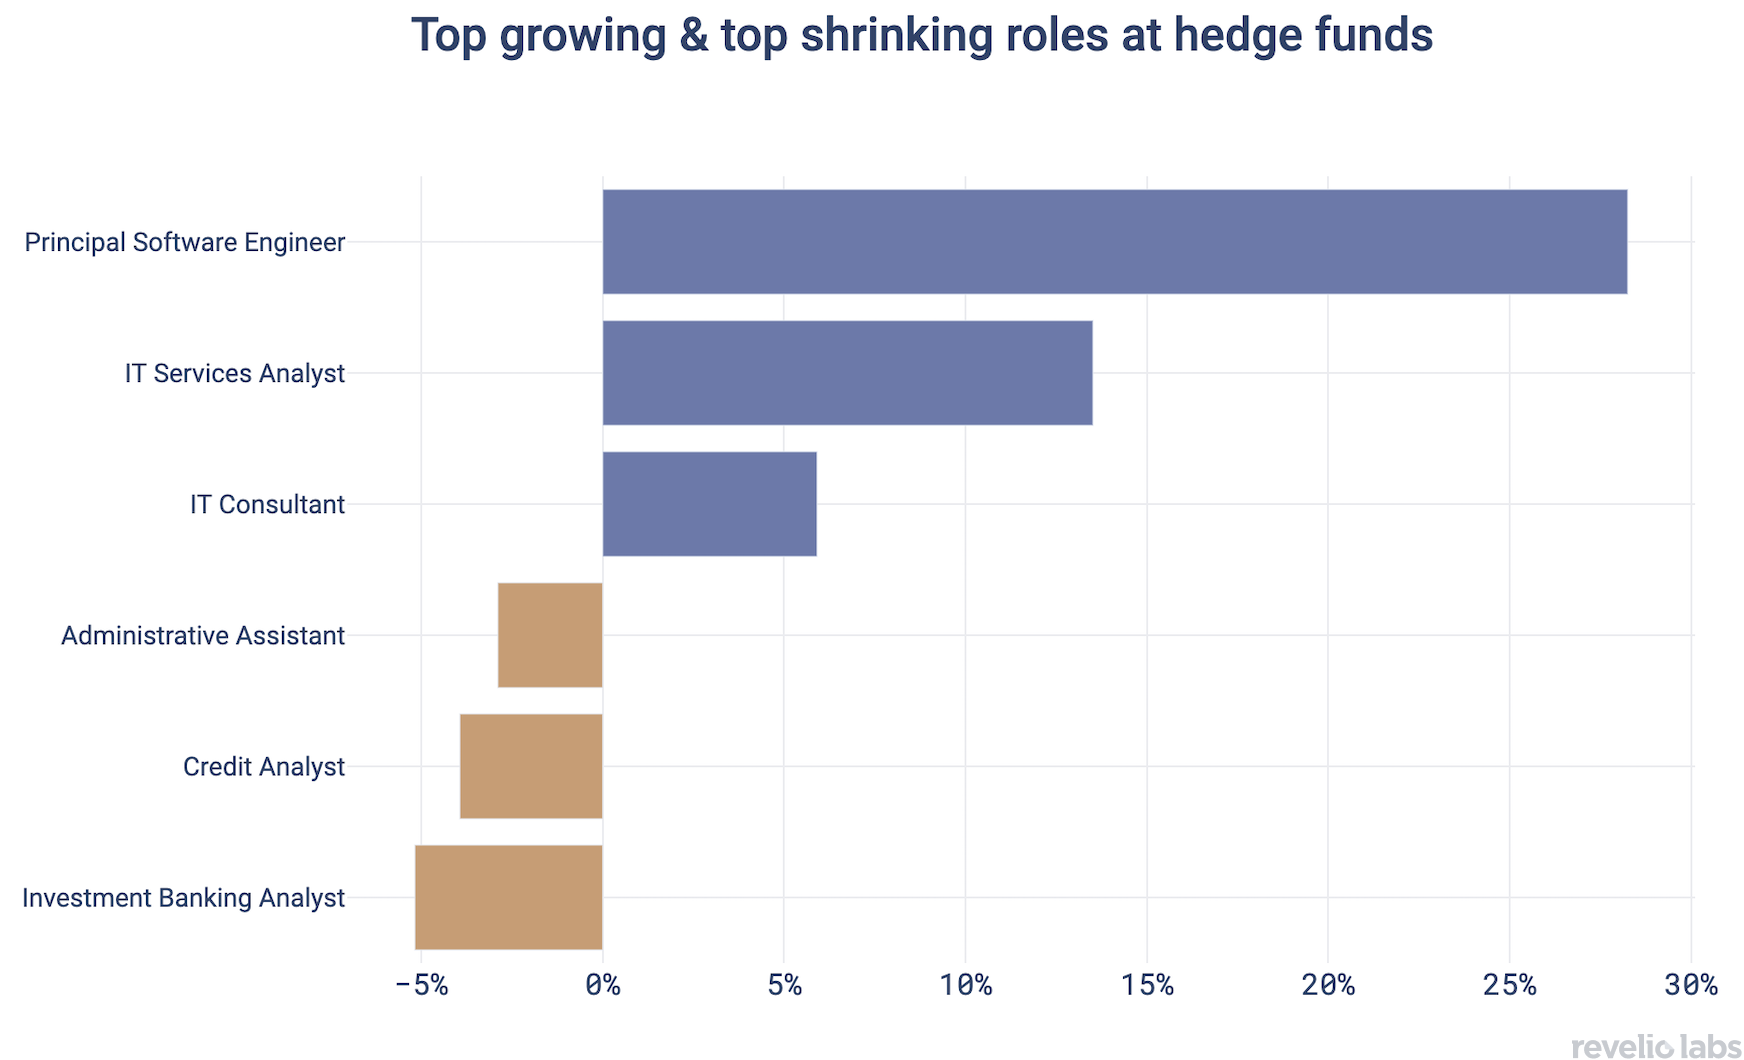 Top growing & top shrinking roles at hedge funds